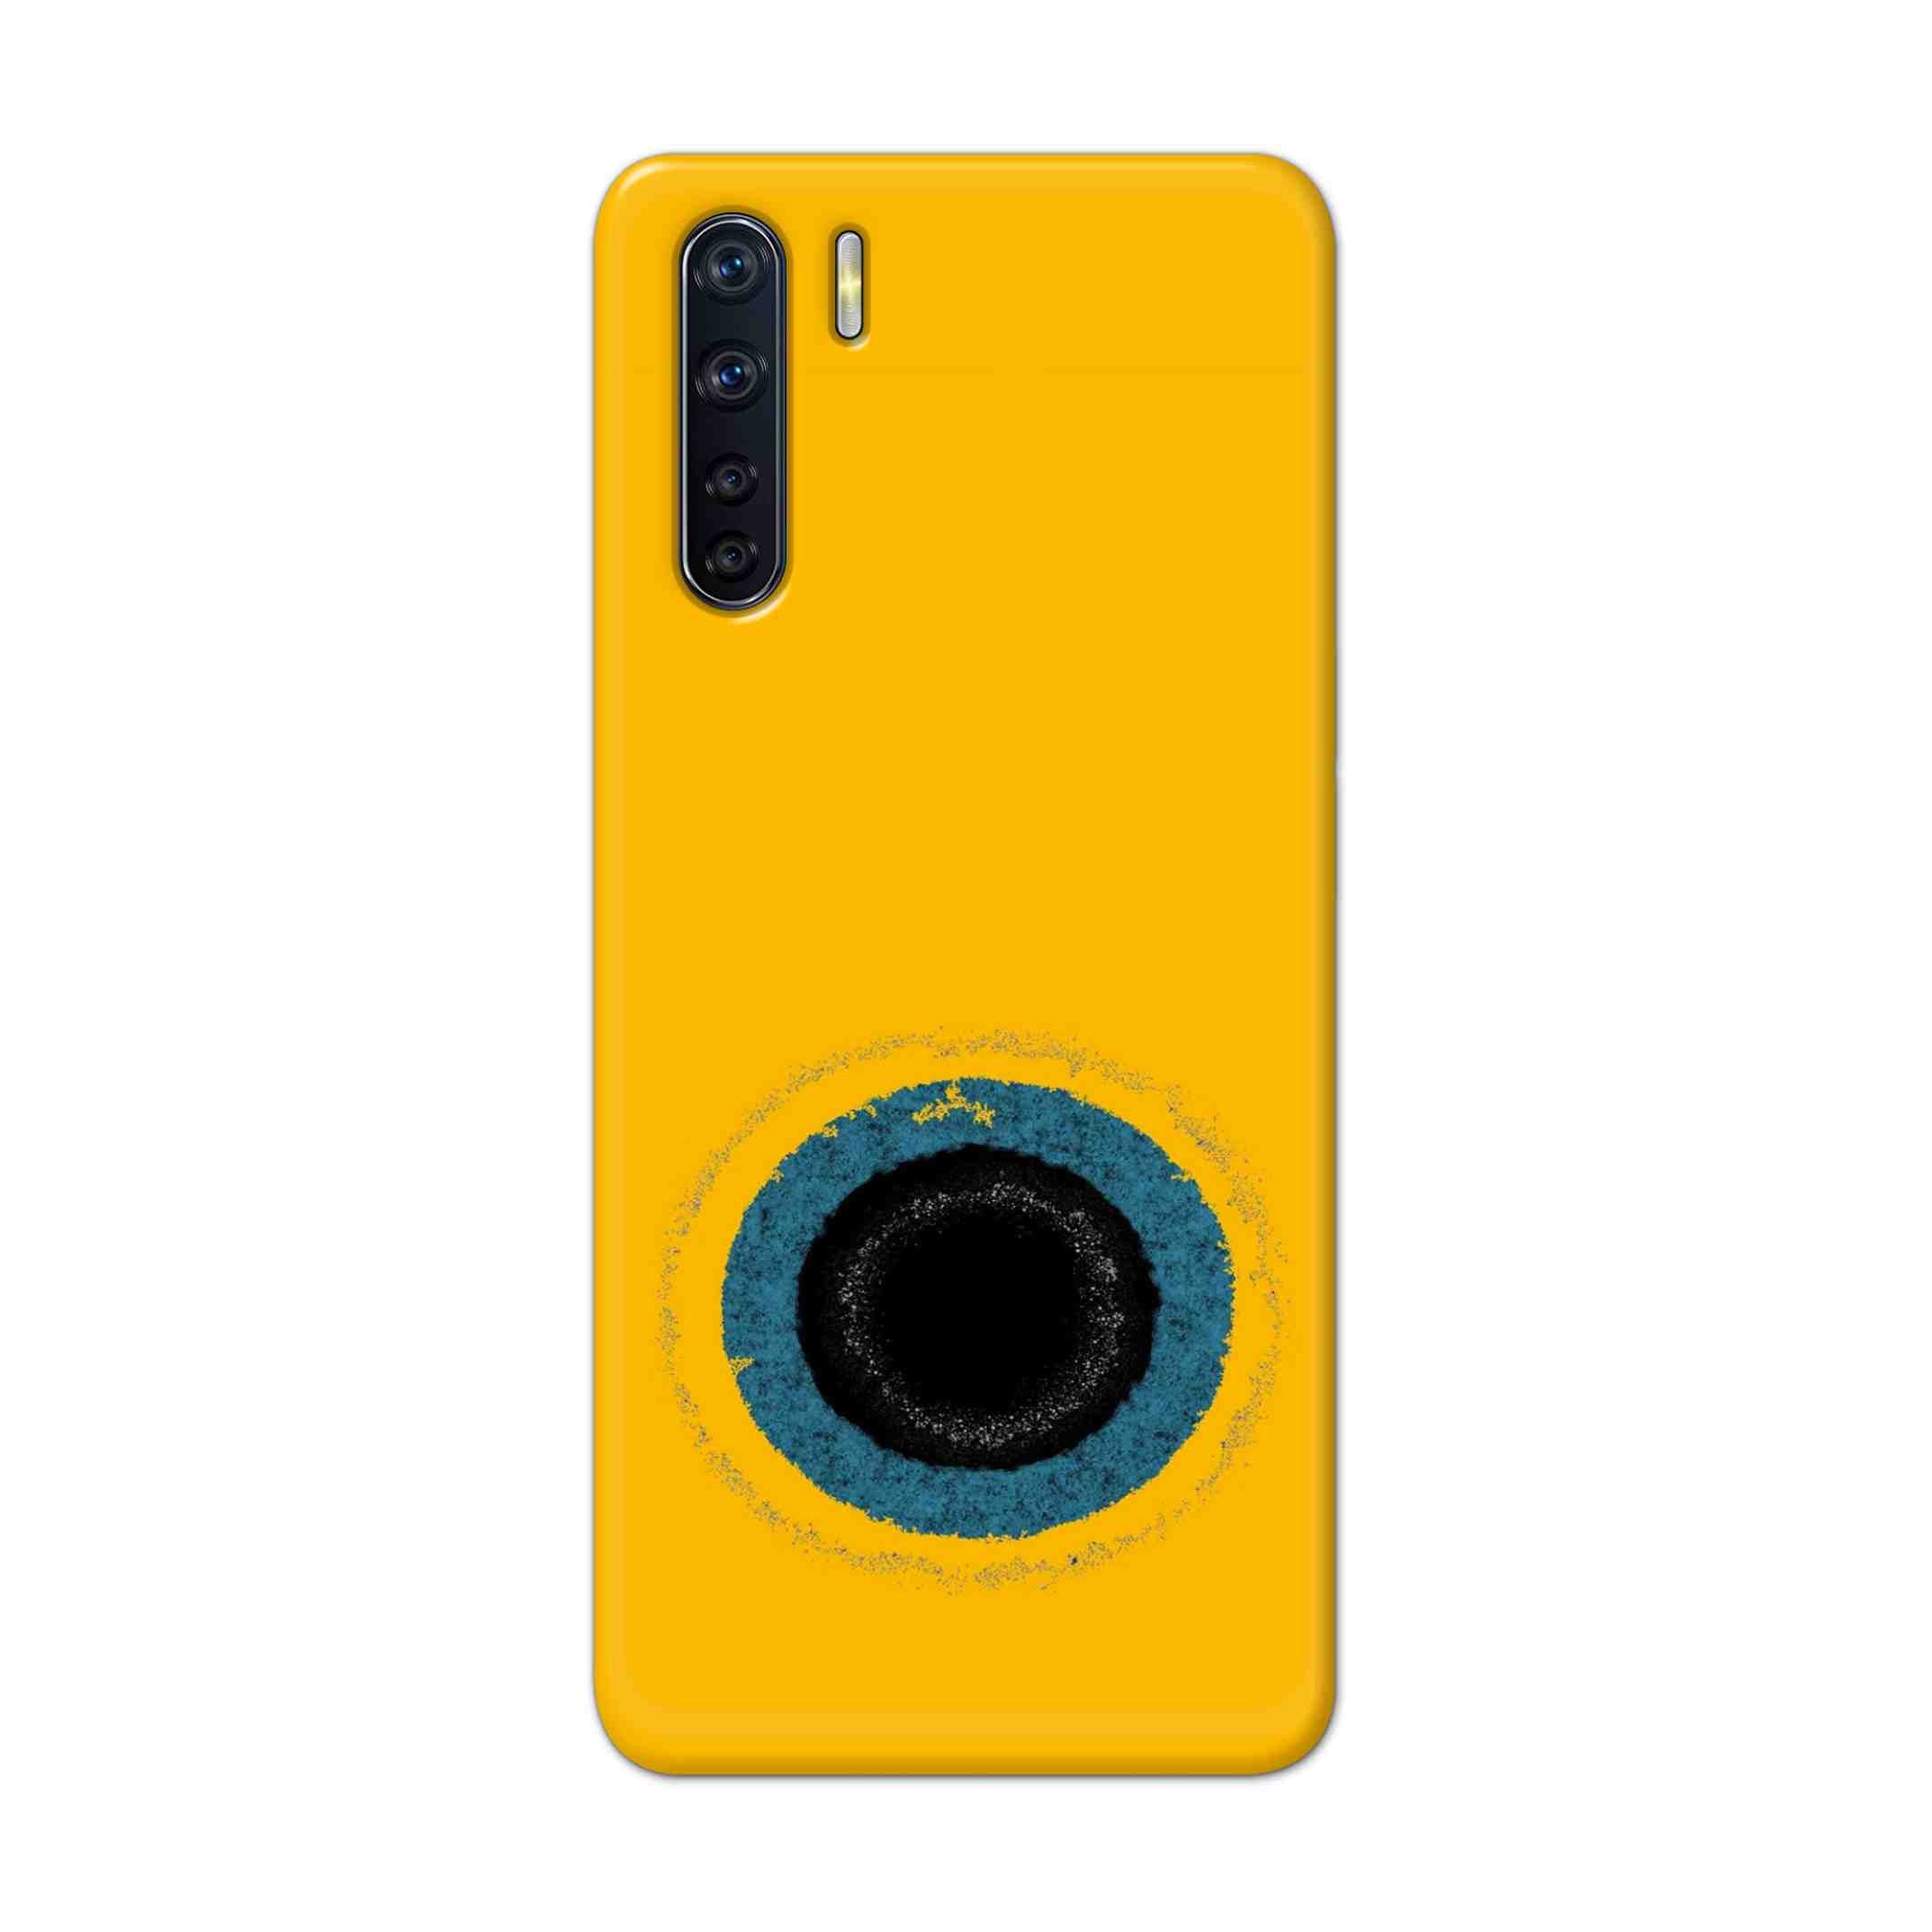 Buy Dark Hole With Yellow Background Hard Back Mobile Phone Case Cover For OPPO F15 Online